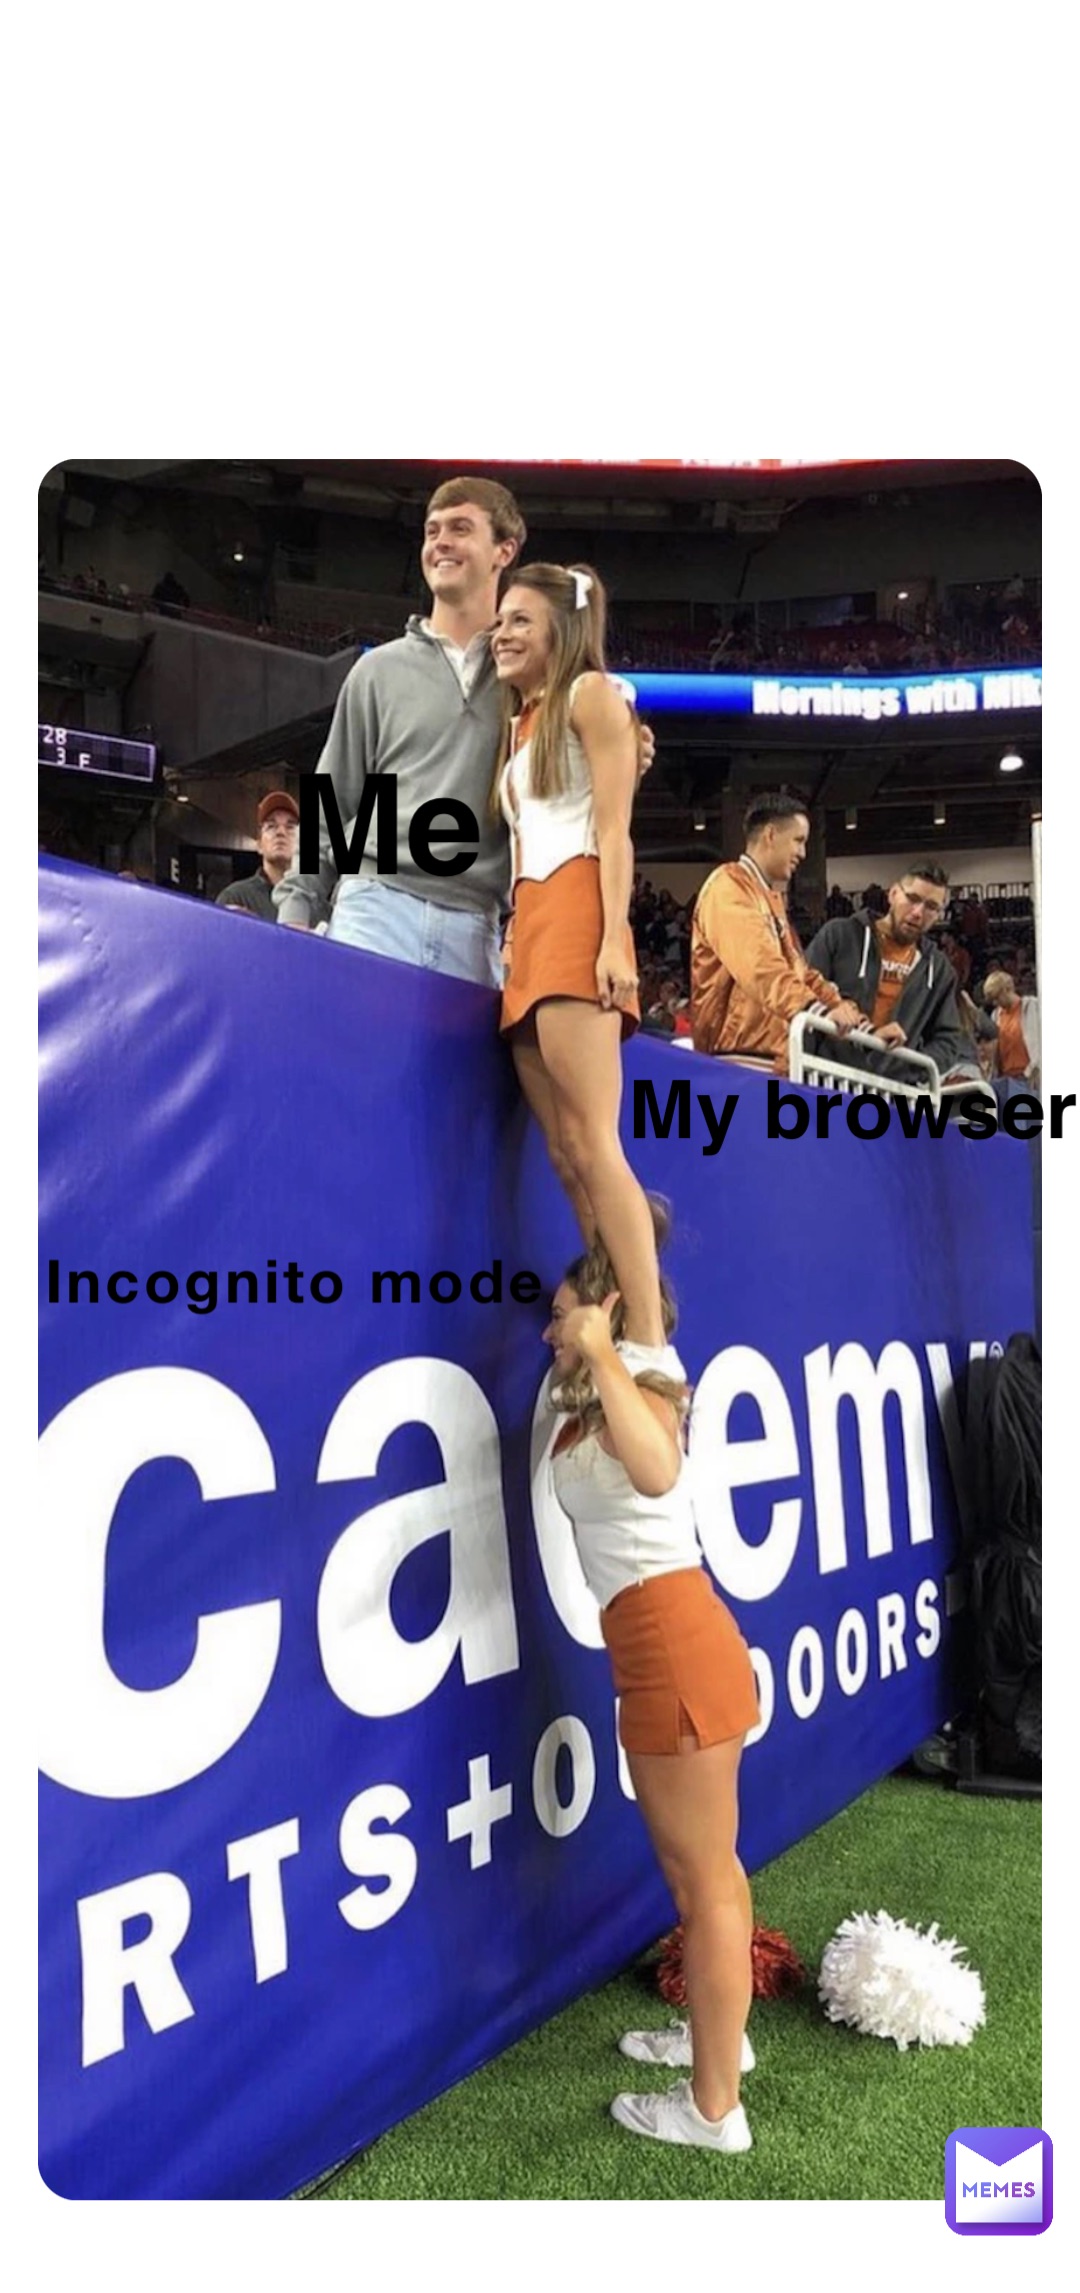 Incognito mode My browser Me